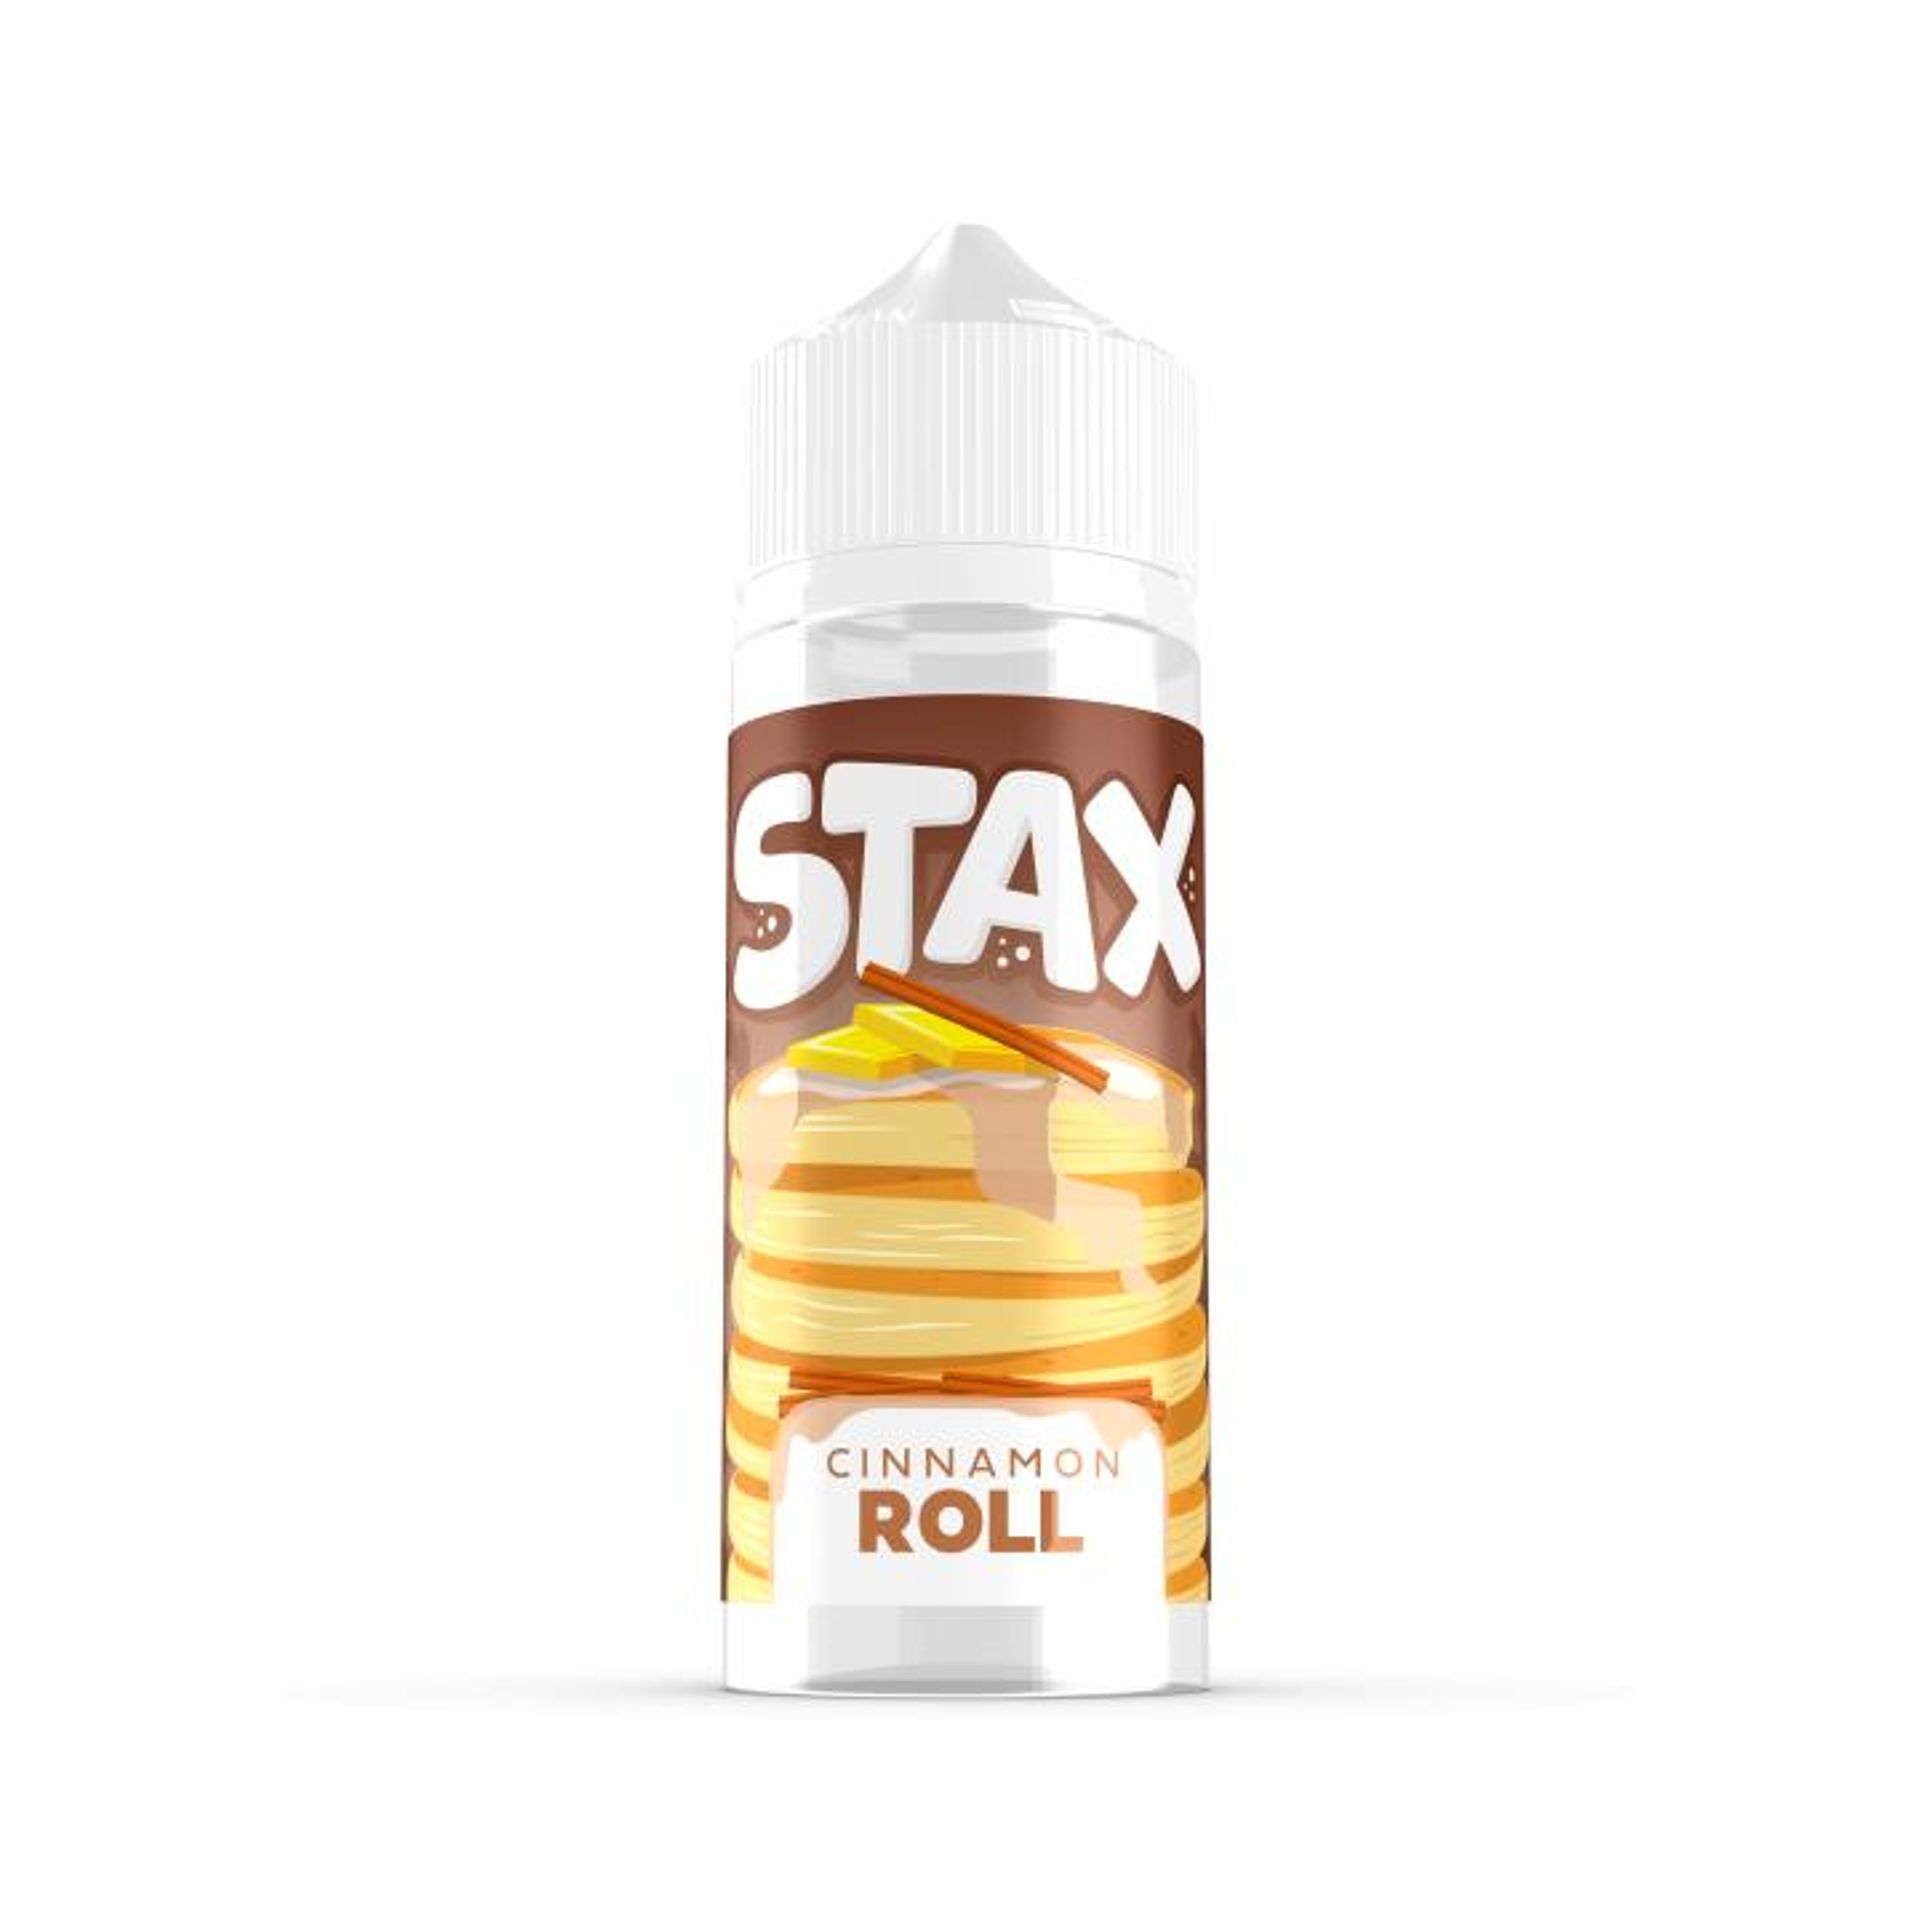 Image of Cinnamon Roll Pancakes by Stax